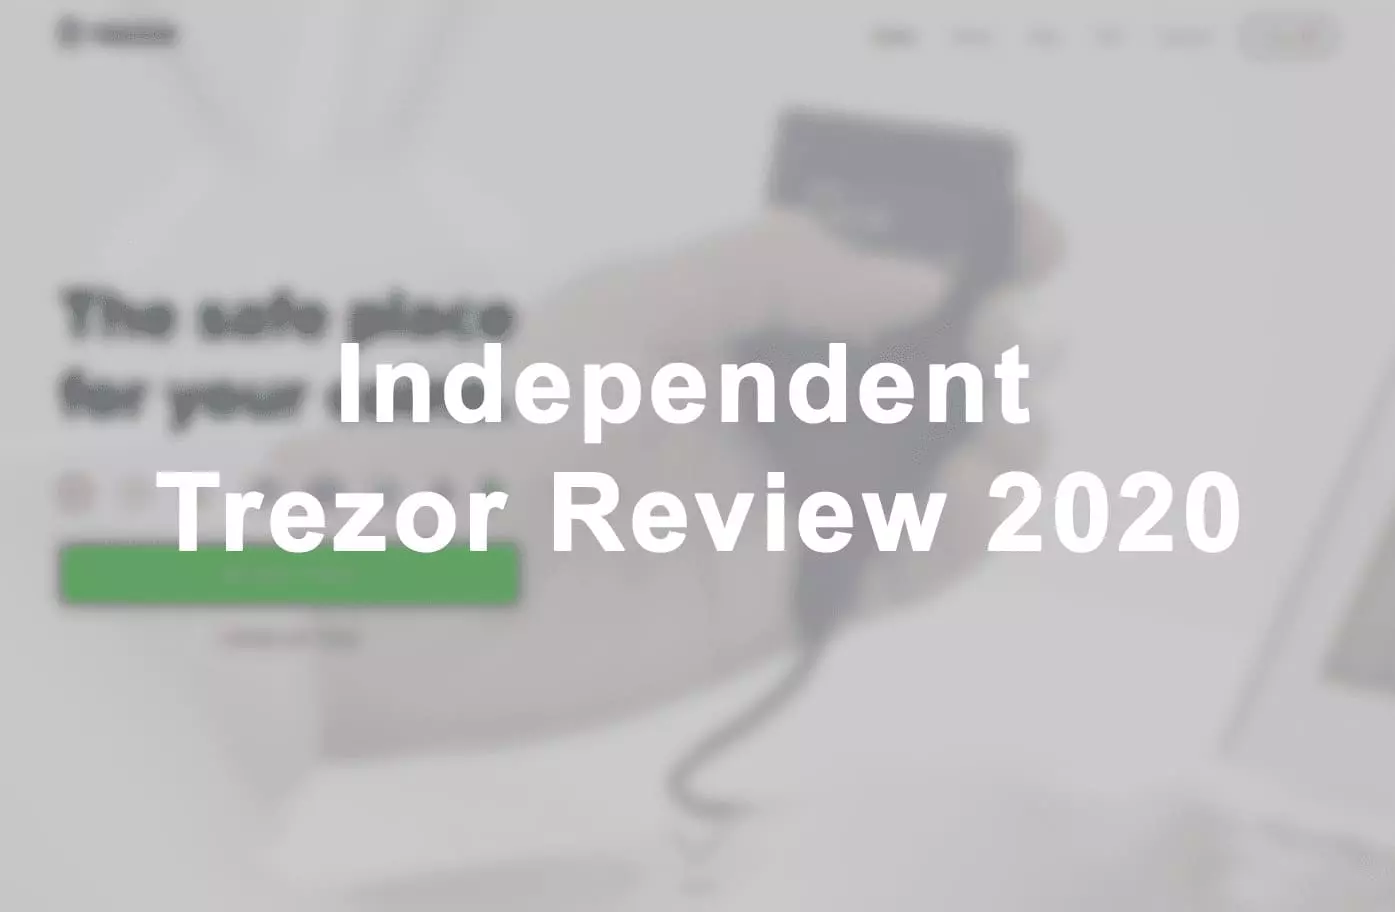 trezor review 2020 by safetrading